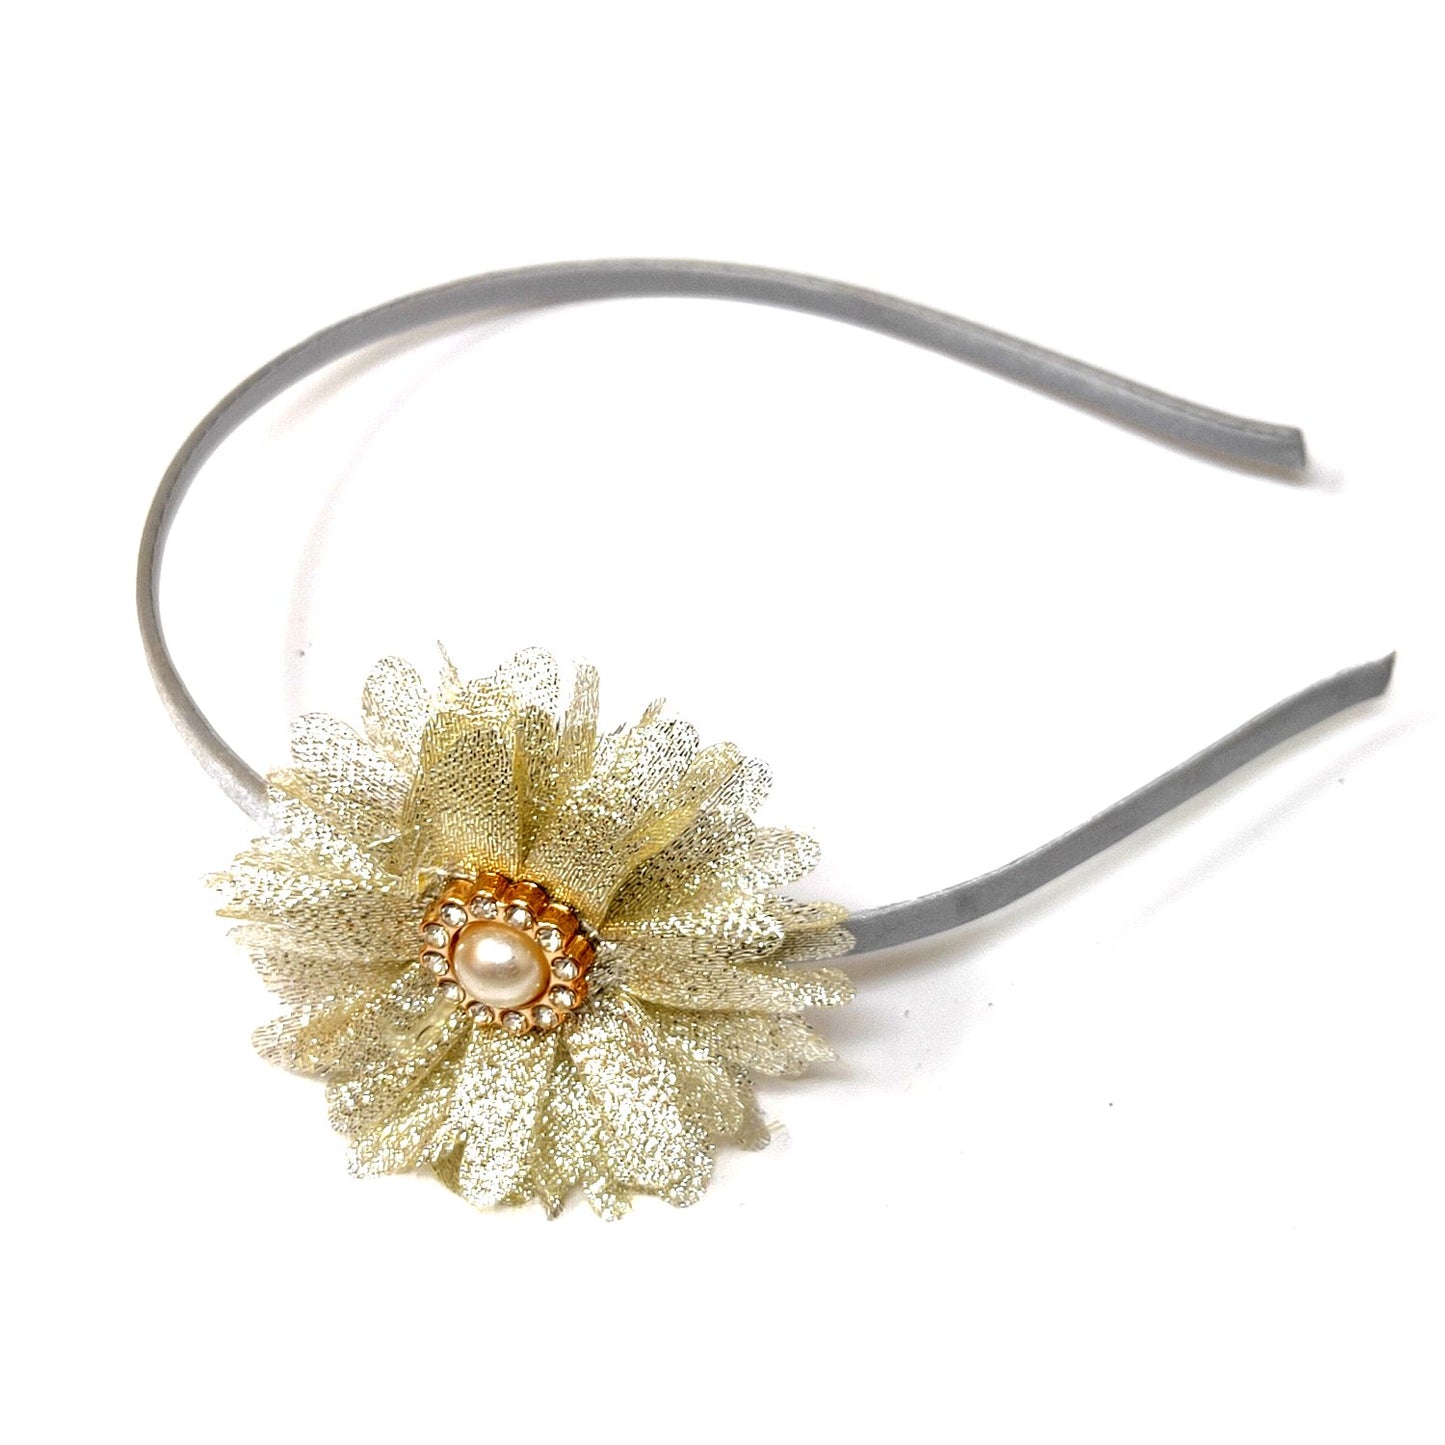 Anokhi Ada Floral with Metal Hairband/Headband for Kids, Girls and Women (Silver, 97-06)